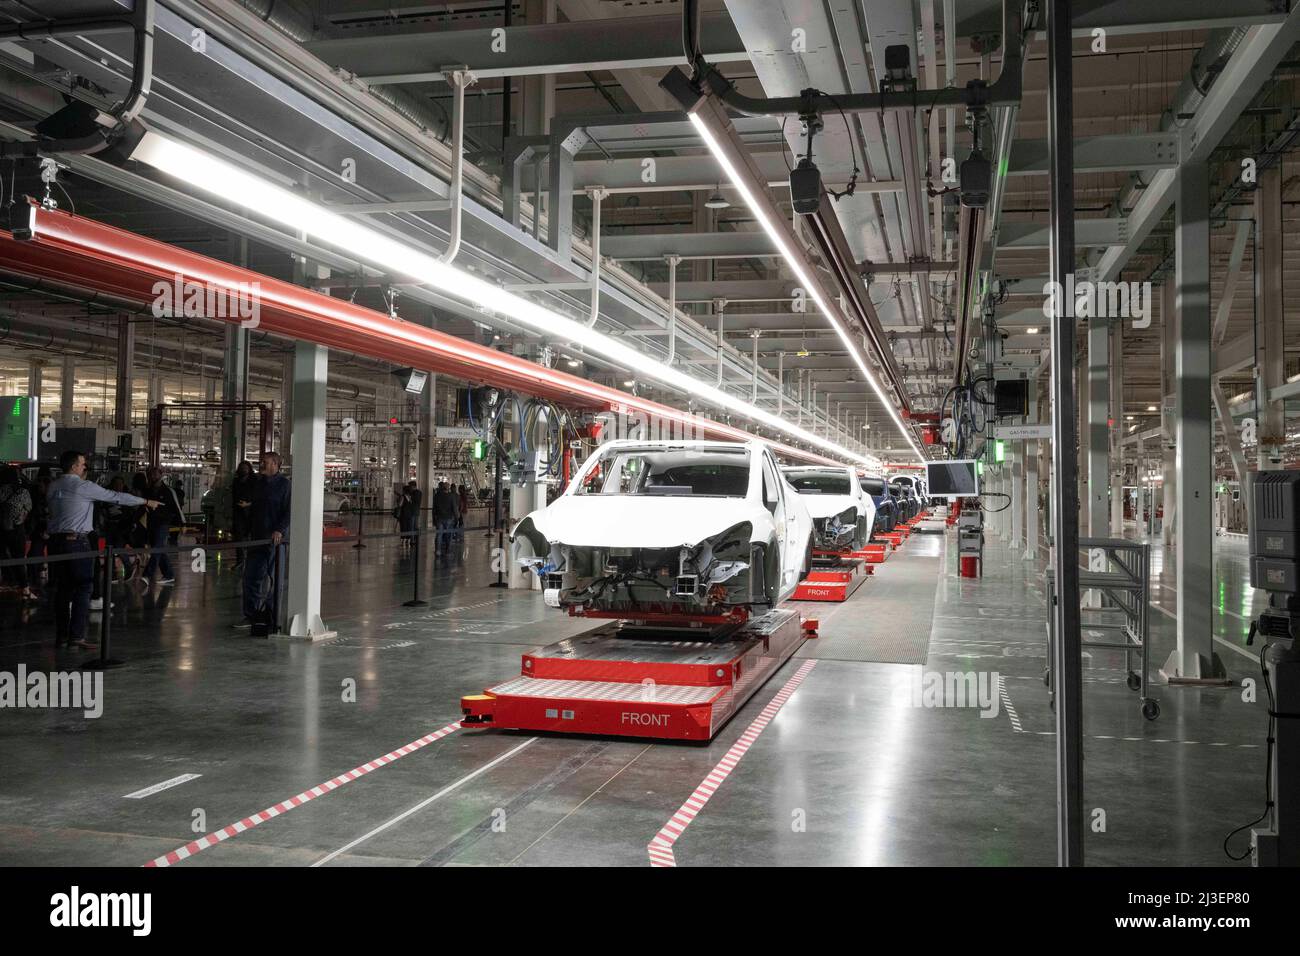 Austin Texas USA, April 7 2022: Machinery on automated production line  holds partially built cars at the new Tesla Gigafactory Texas as guests  tour the facility during its private grand opening event.